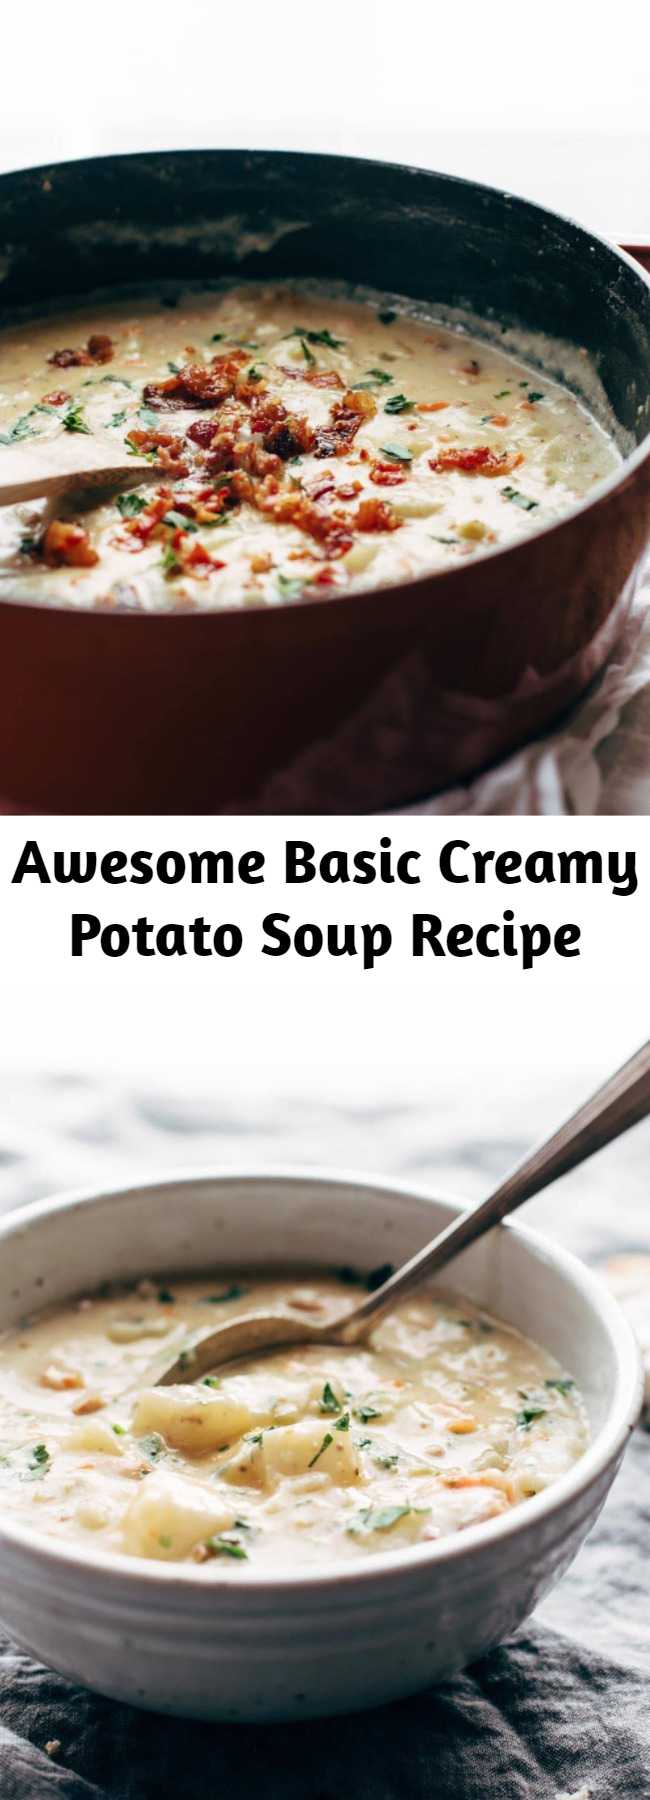 Awesome Basic Creamy Potato Soup Recipe - Creamy Potato Soup – so simple and all-homemade, with carrots, celery, potatoes, milk, butter, flour, and bacon. perfect comfort food with no canned cream-of-anything soups. #potatosoup #easyrecipe #dinnerrecipe #soup